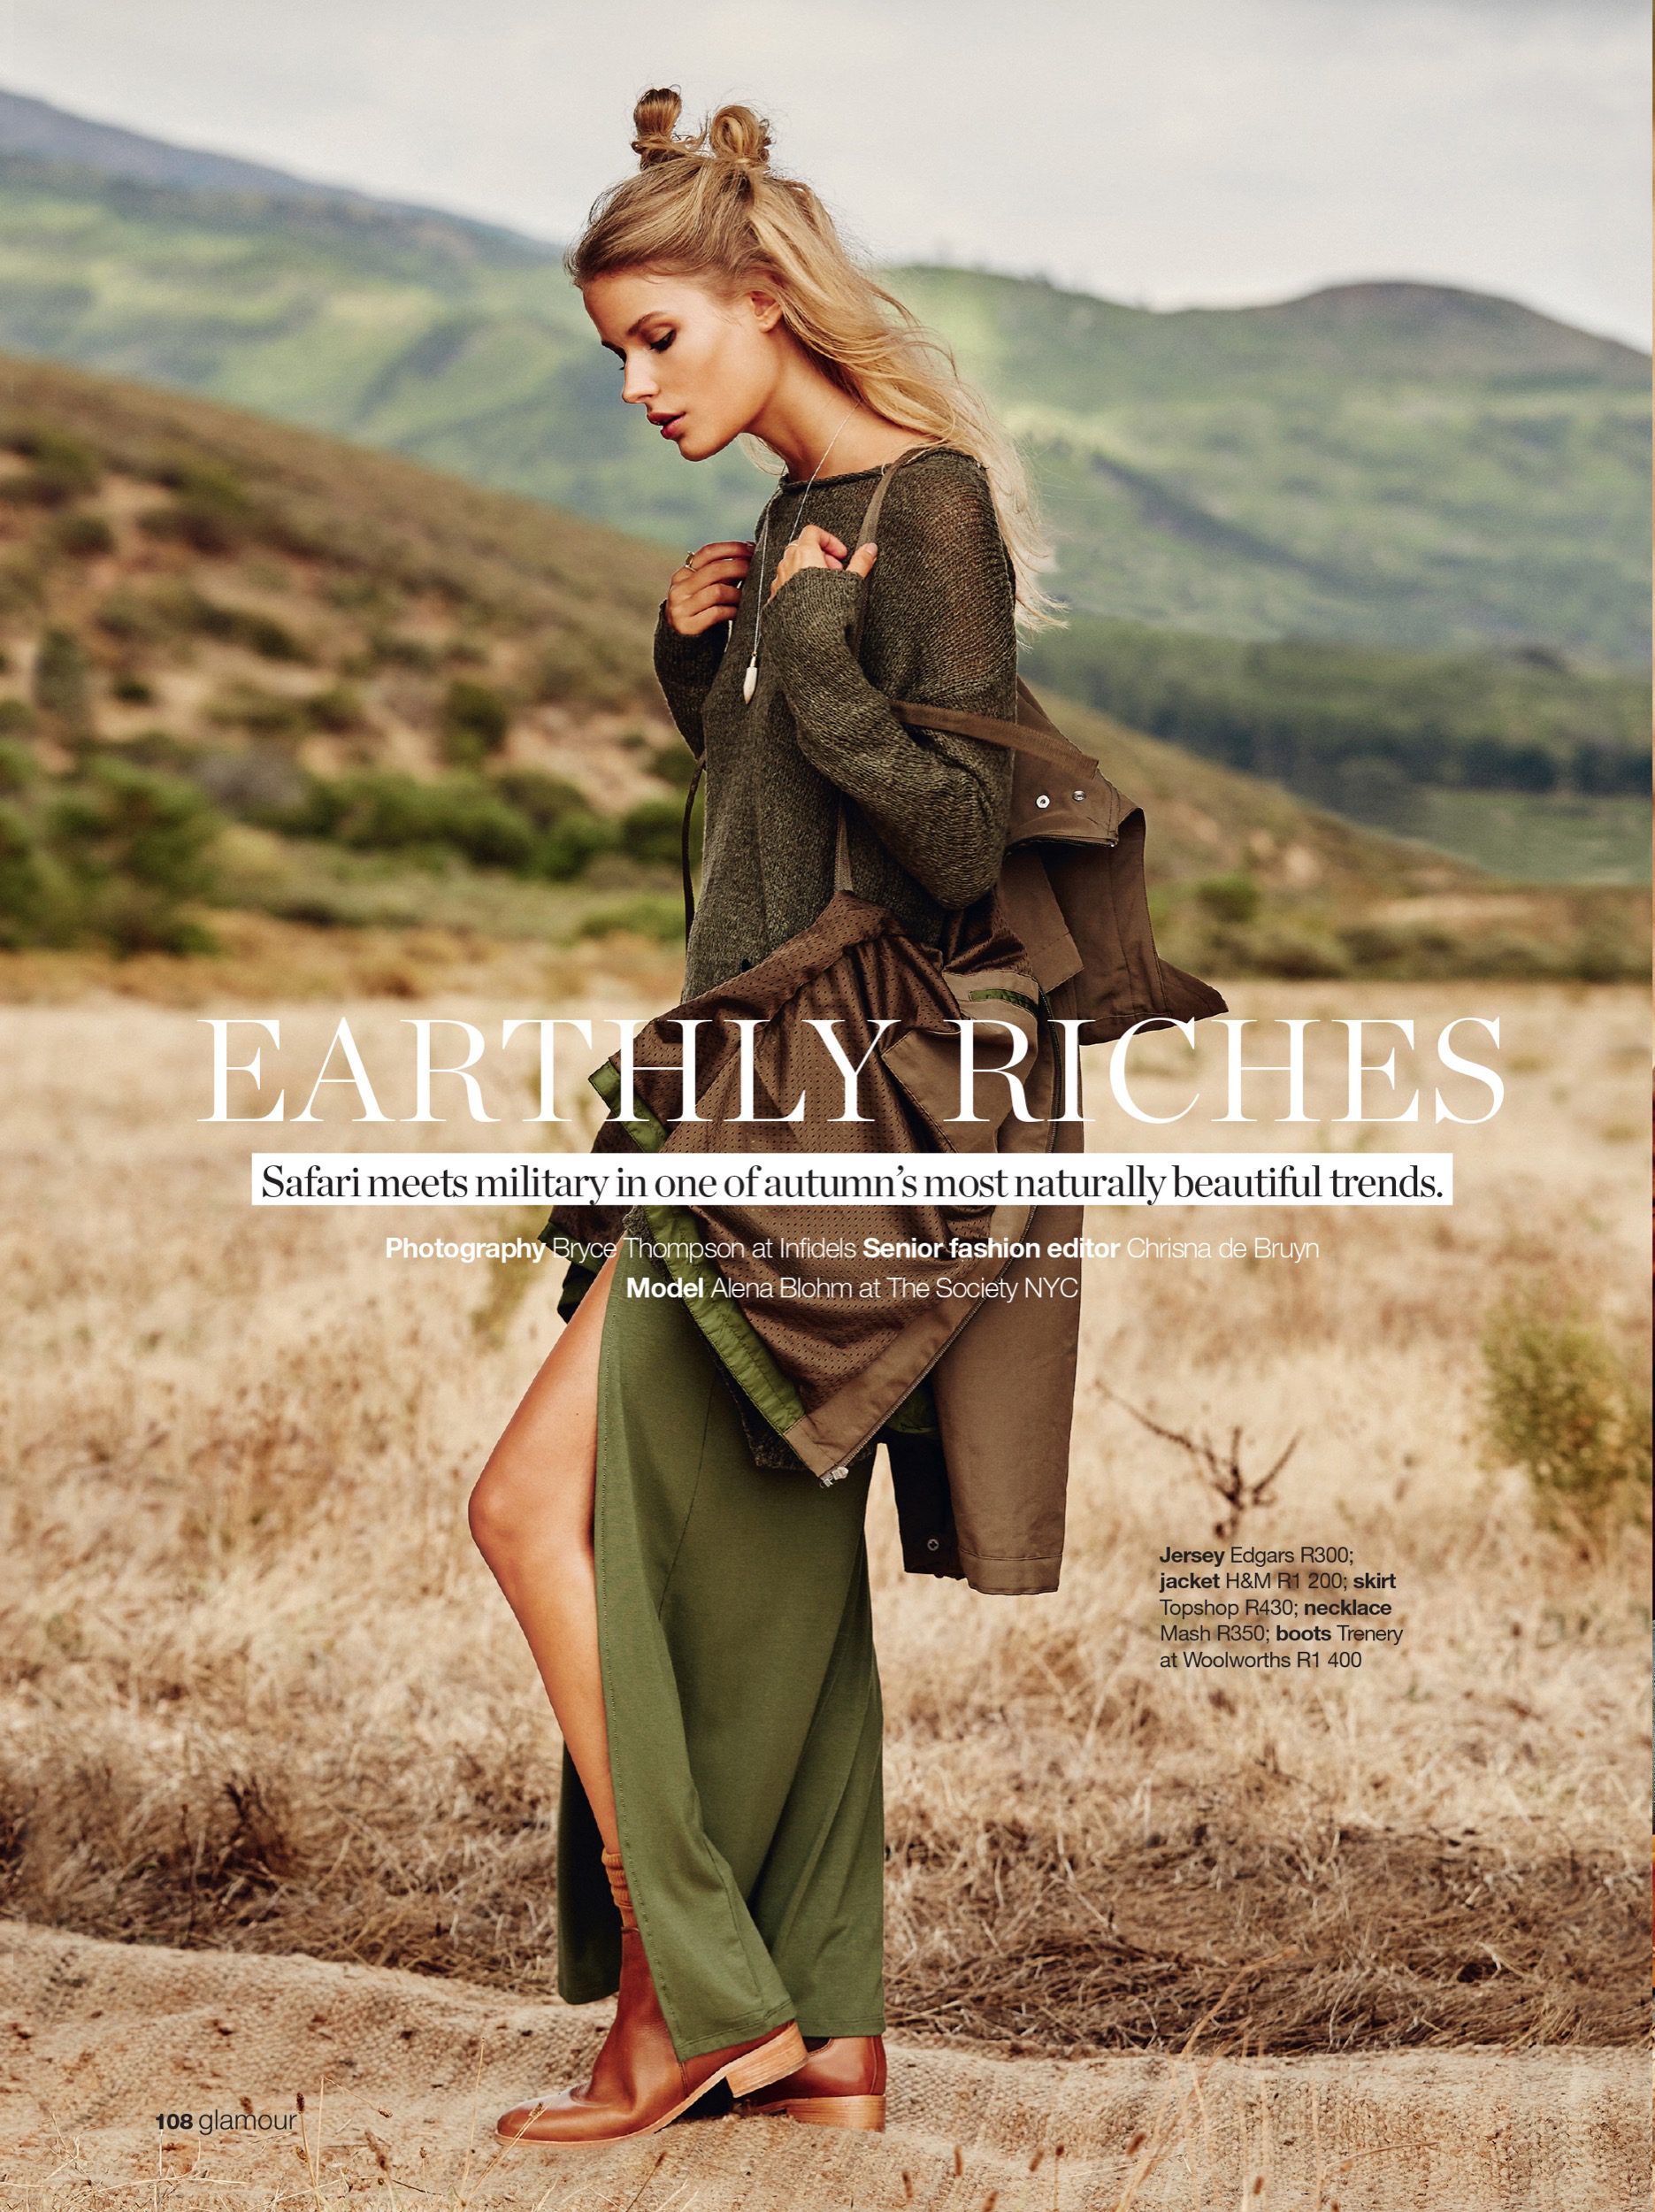 kathrin-hohberg-glamour-sa-earthly-riches-alena-blohm-bryce-thompson-02